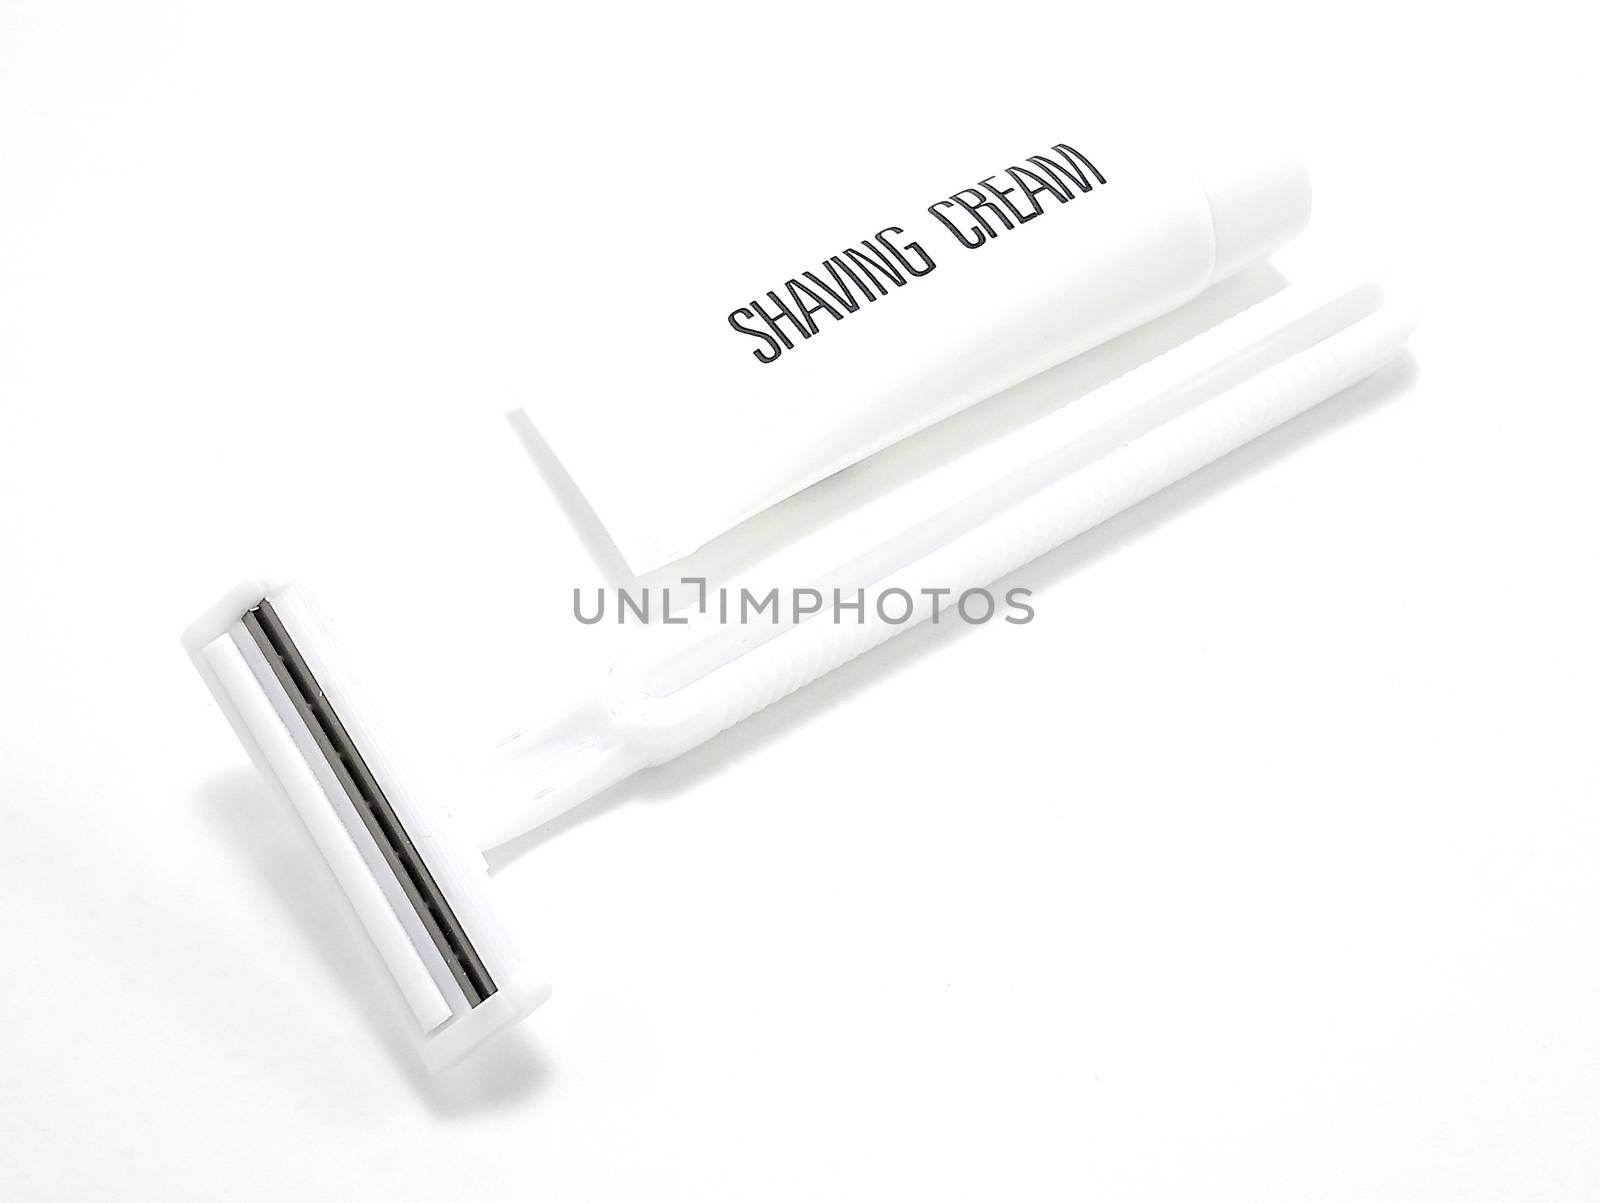 Disposable white plastic body manual shaver with blade attach to the head and shaving cream